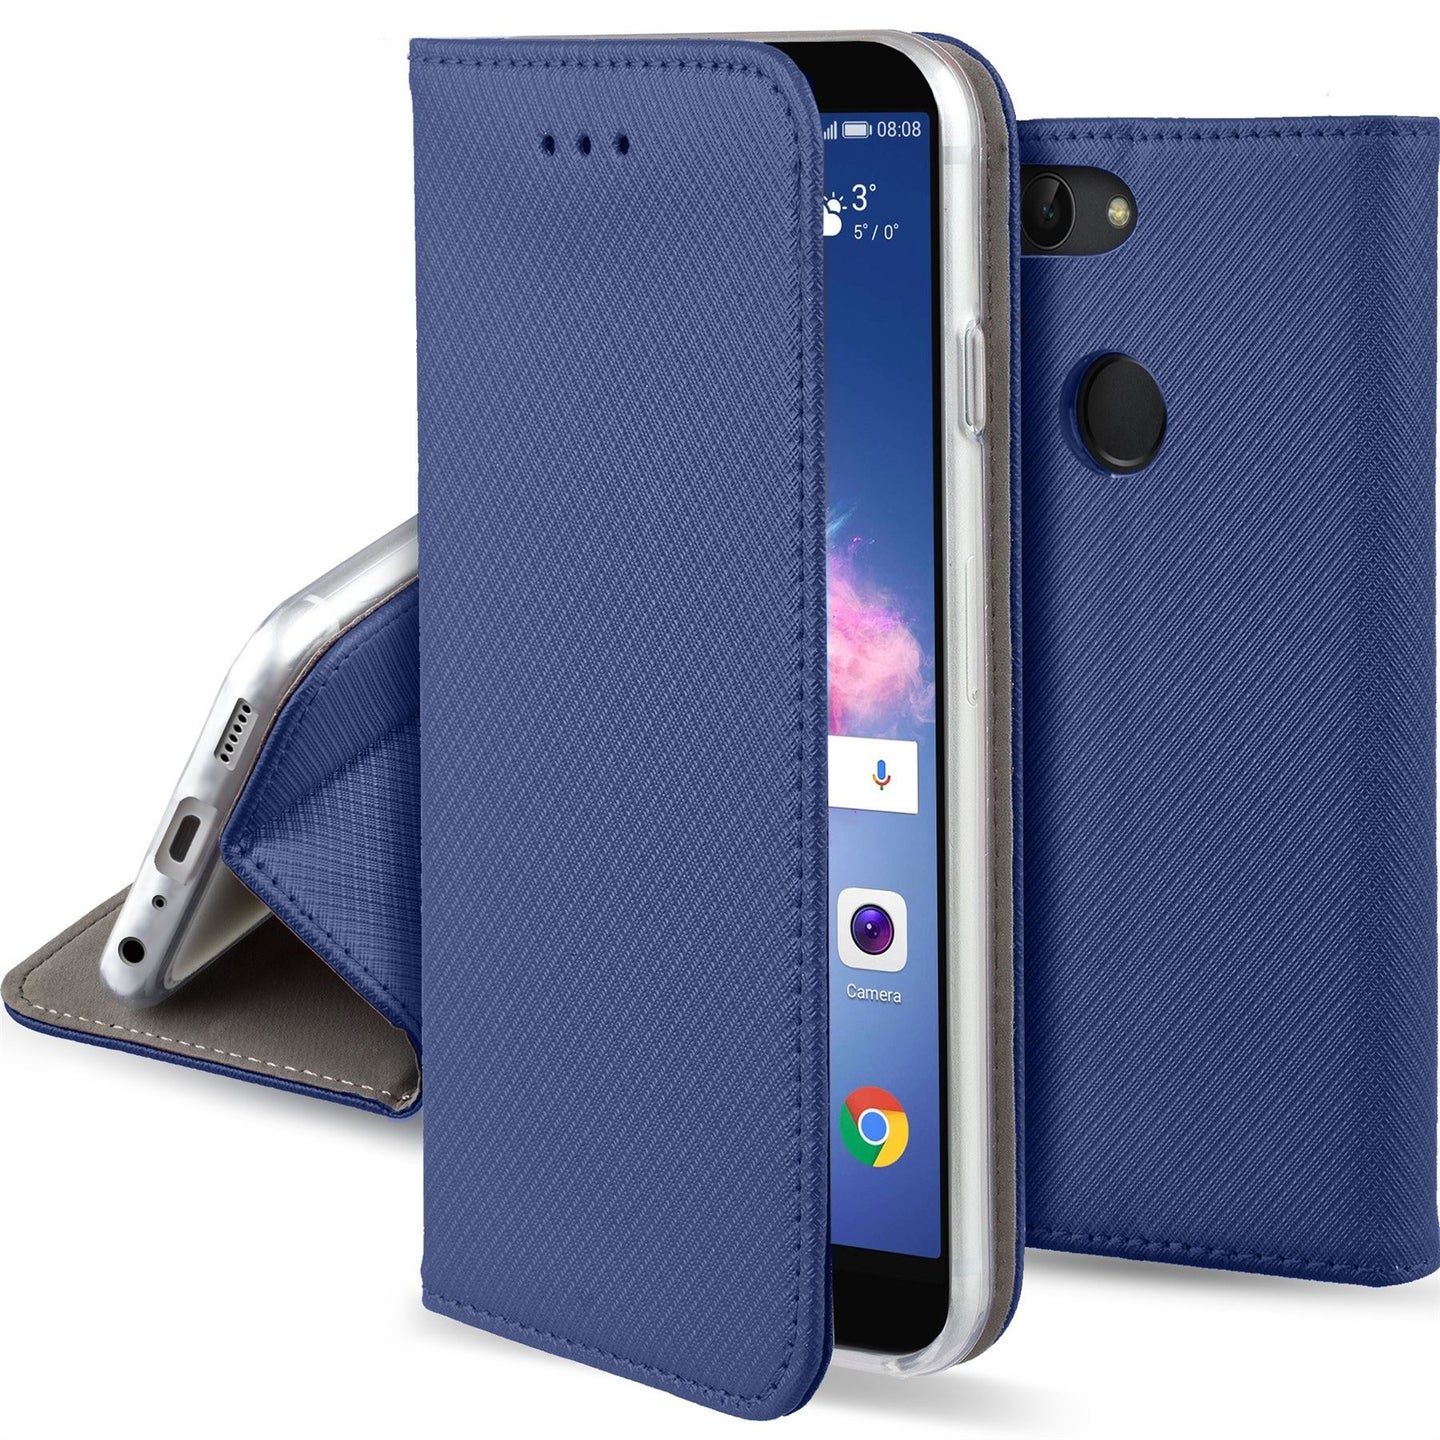 Moozy Case Flip Cover for Huawei P Smart, Dark Blue - Smart Magnetic Flip Case with Card Holder and Stand